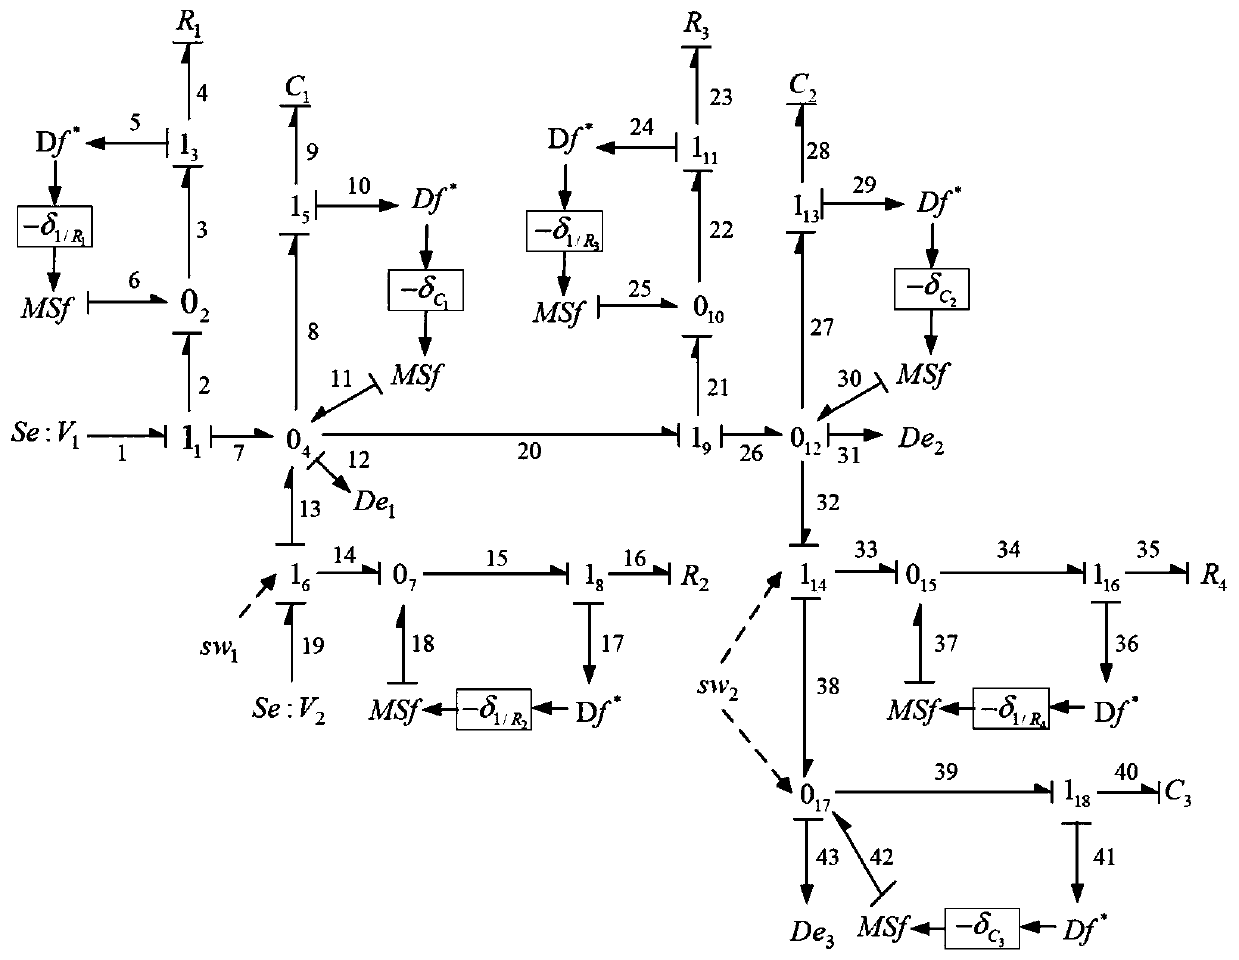 Gradual fault diagnosis and life prediction method of uncertain sophisticated circuit system